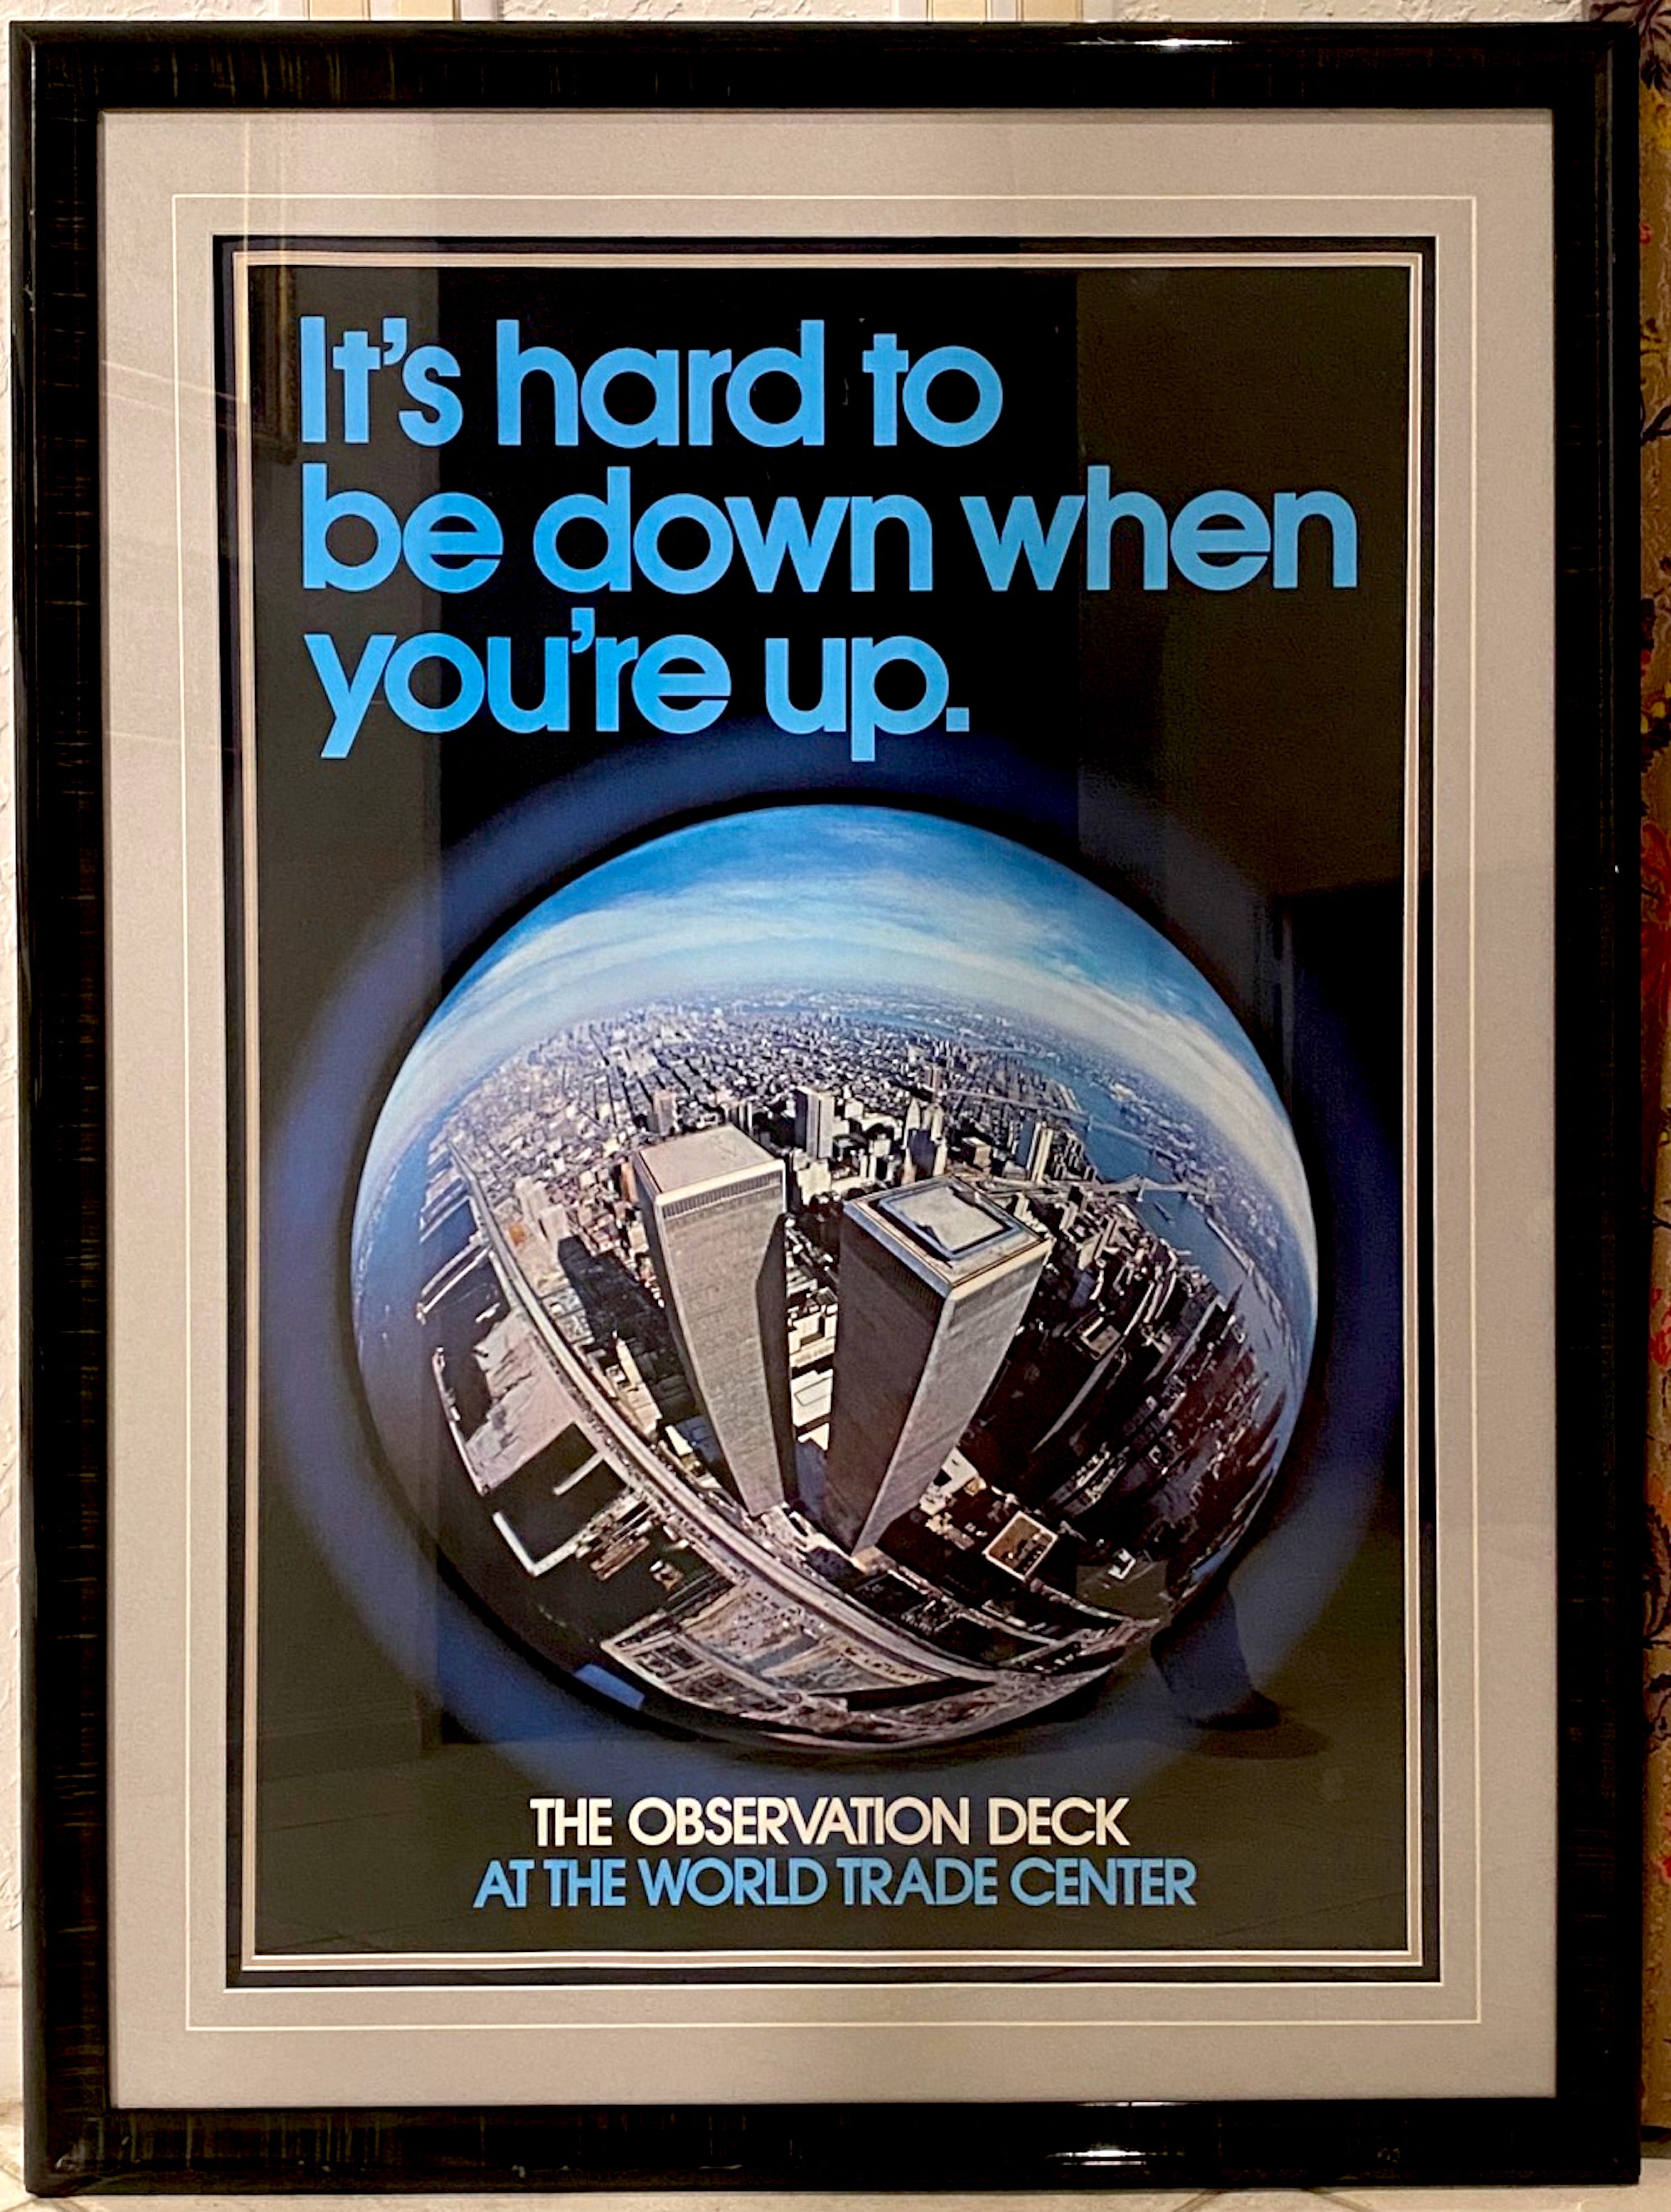 
It's Hard to Be Down When You Are Up, Original New York World Trade Center Poster, circa 1970 original framed, in very good condition.
Poster measures approximately 24' by 36', overall measurement with frame is 32.5